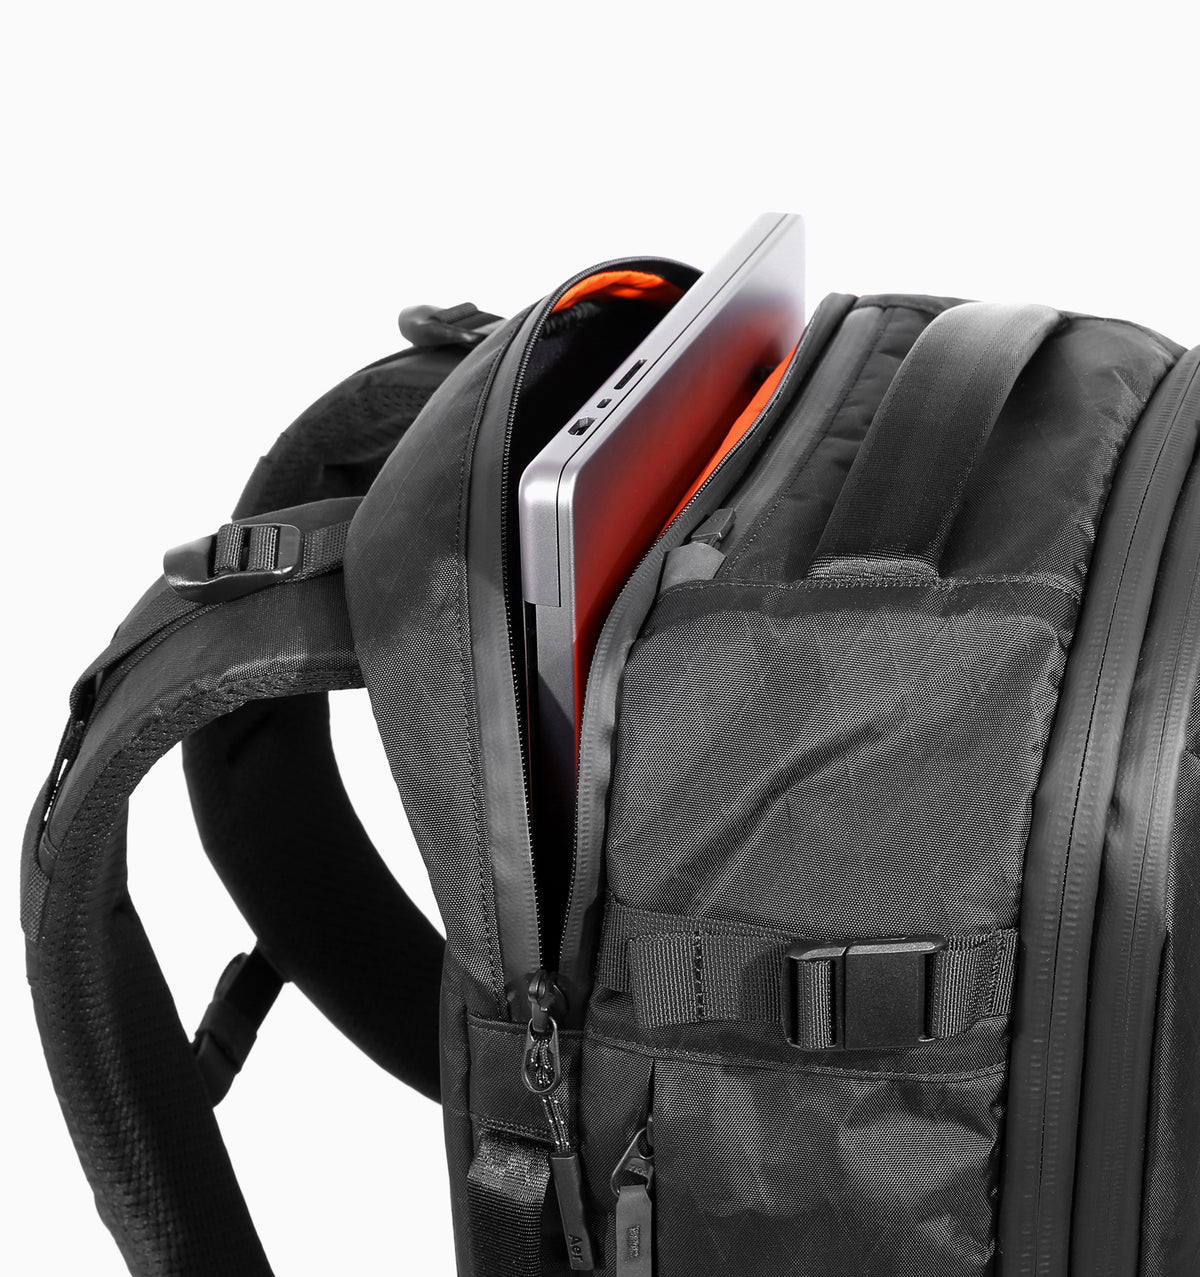 Aer Travel Pack 3 Small X-PAC - Black